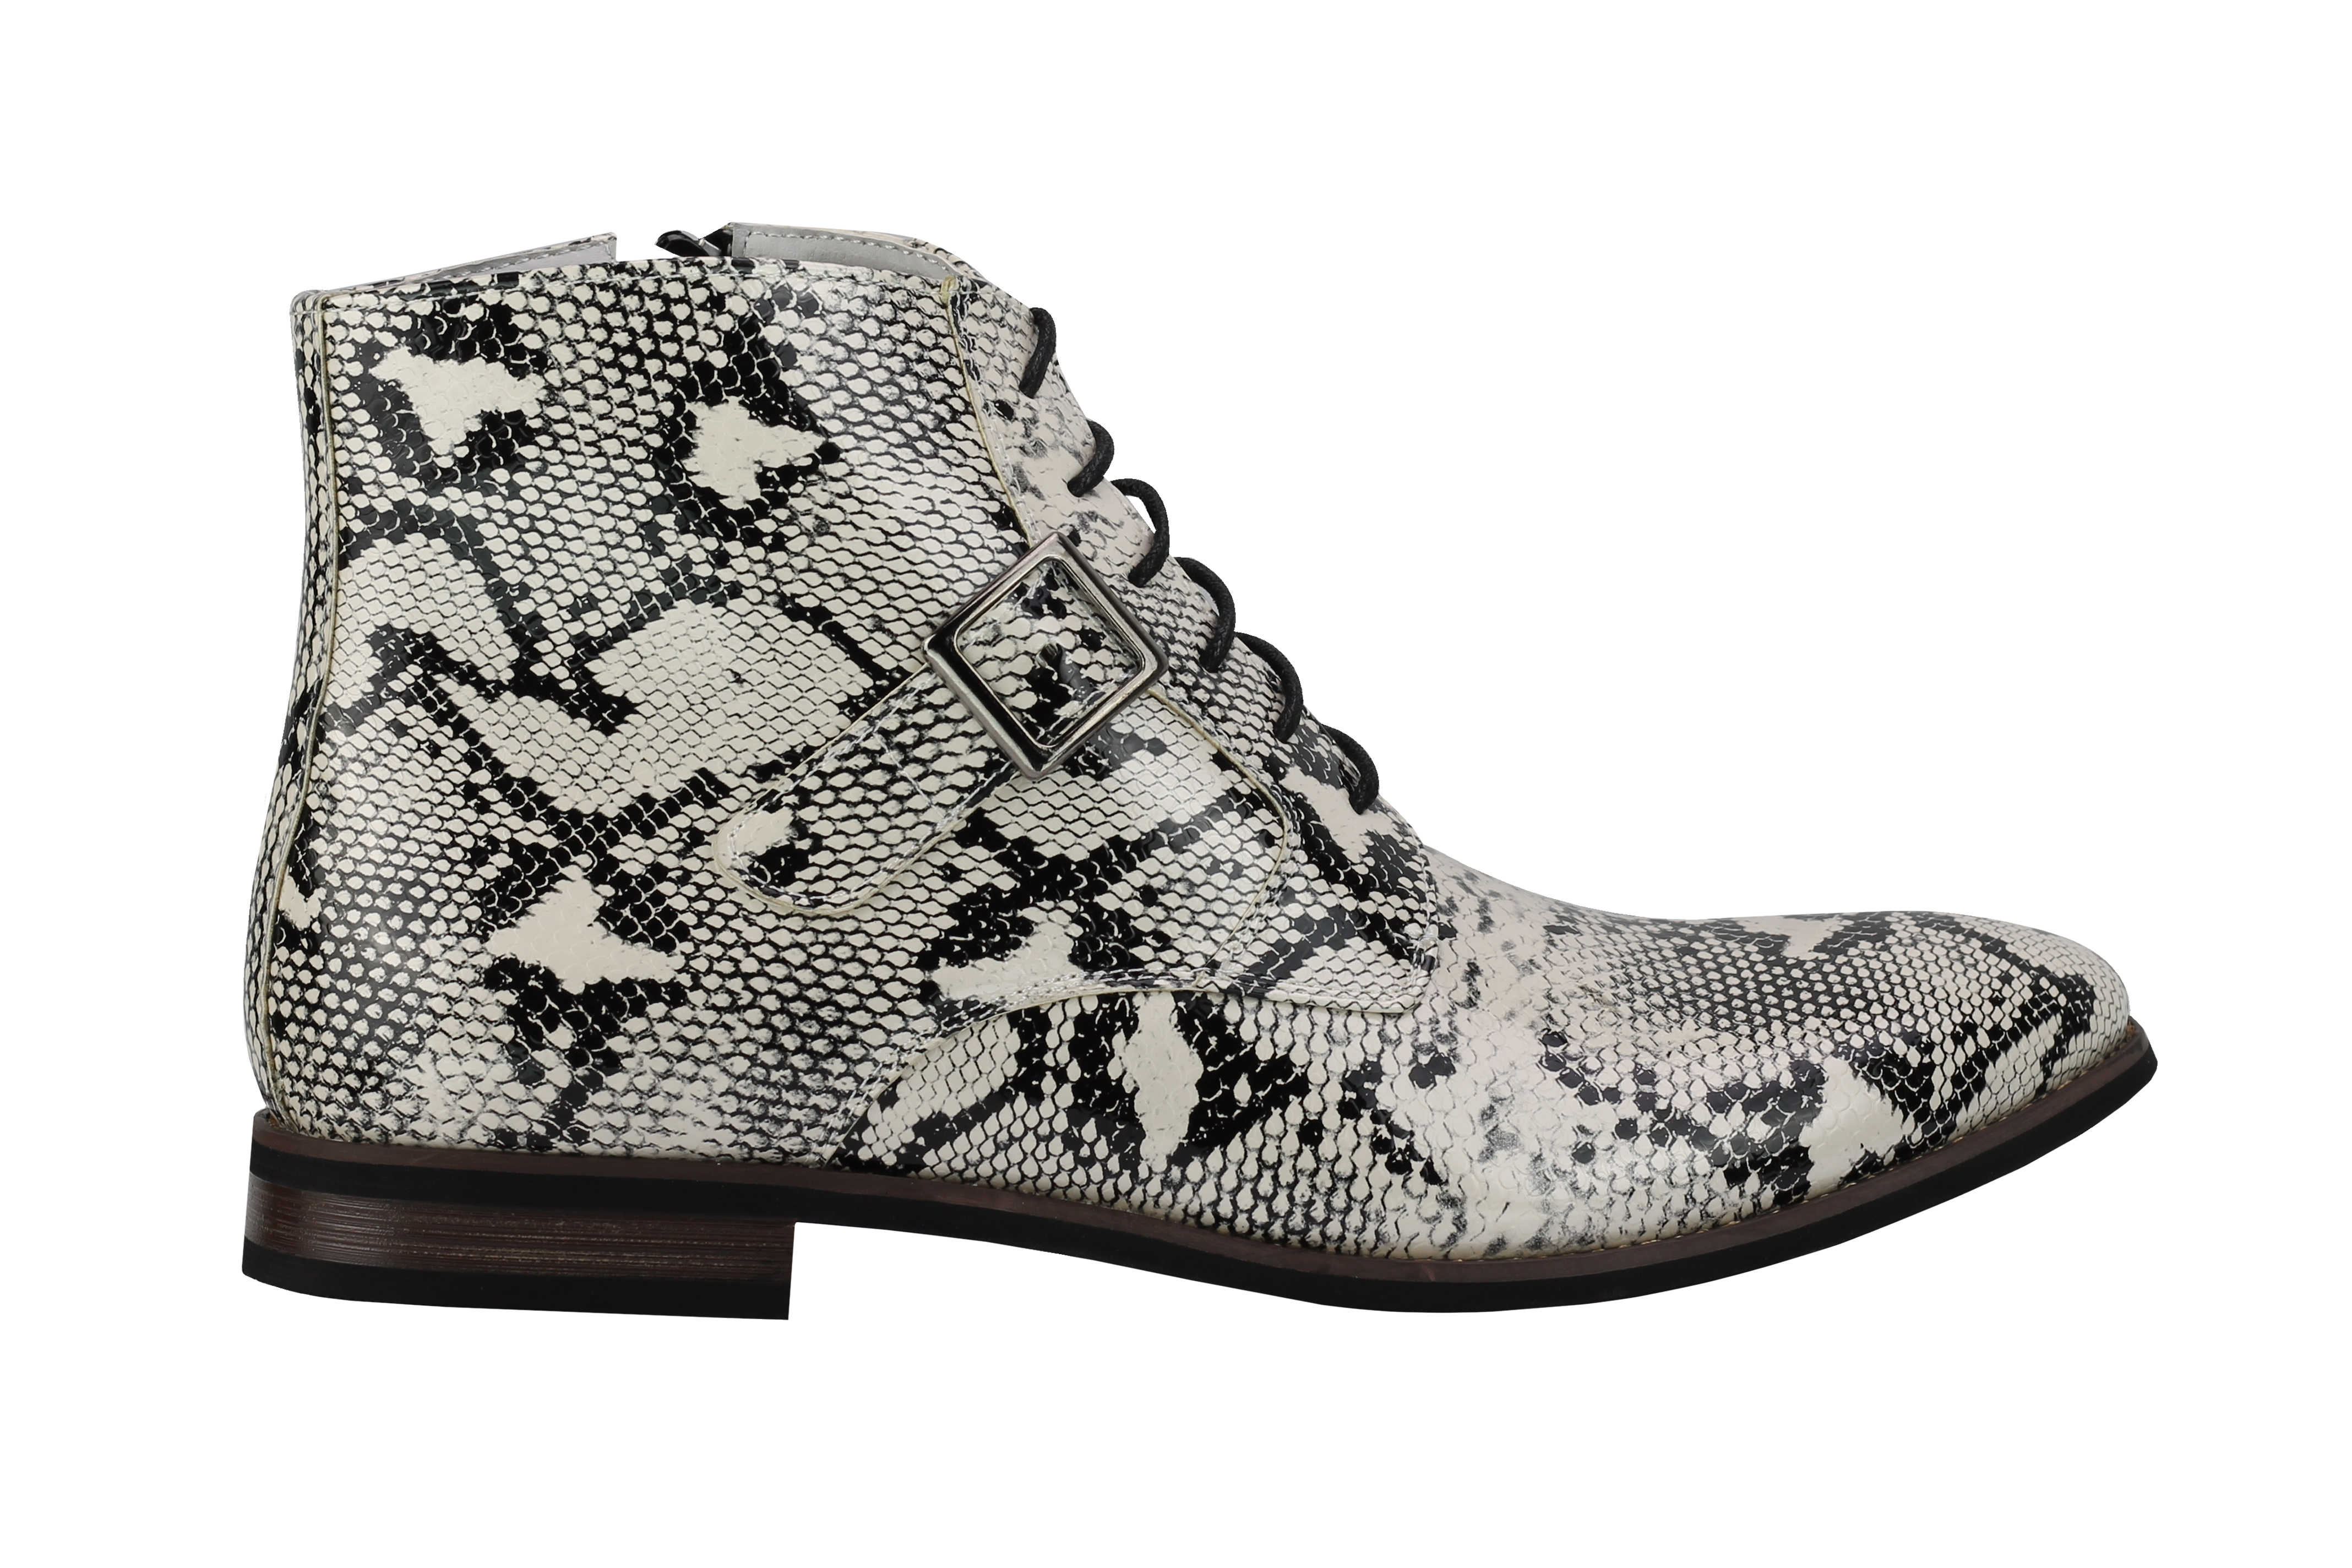 Leather Shiny Snake Skin Ankle Boots Zip